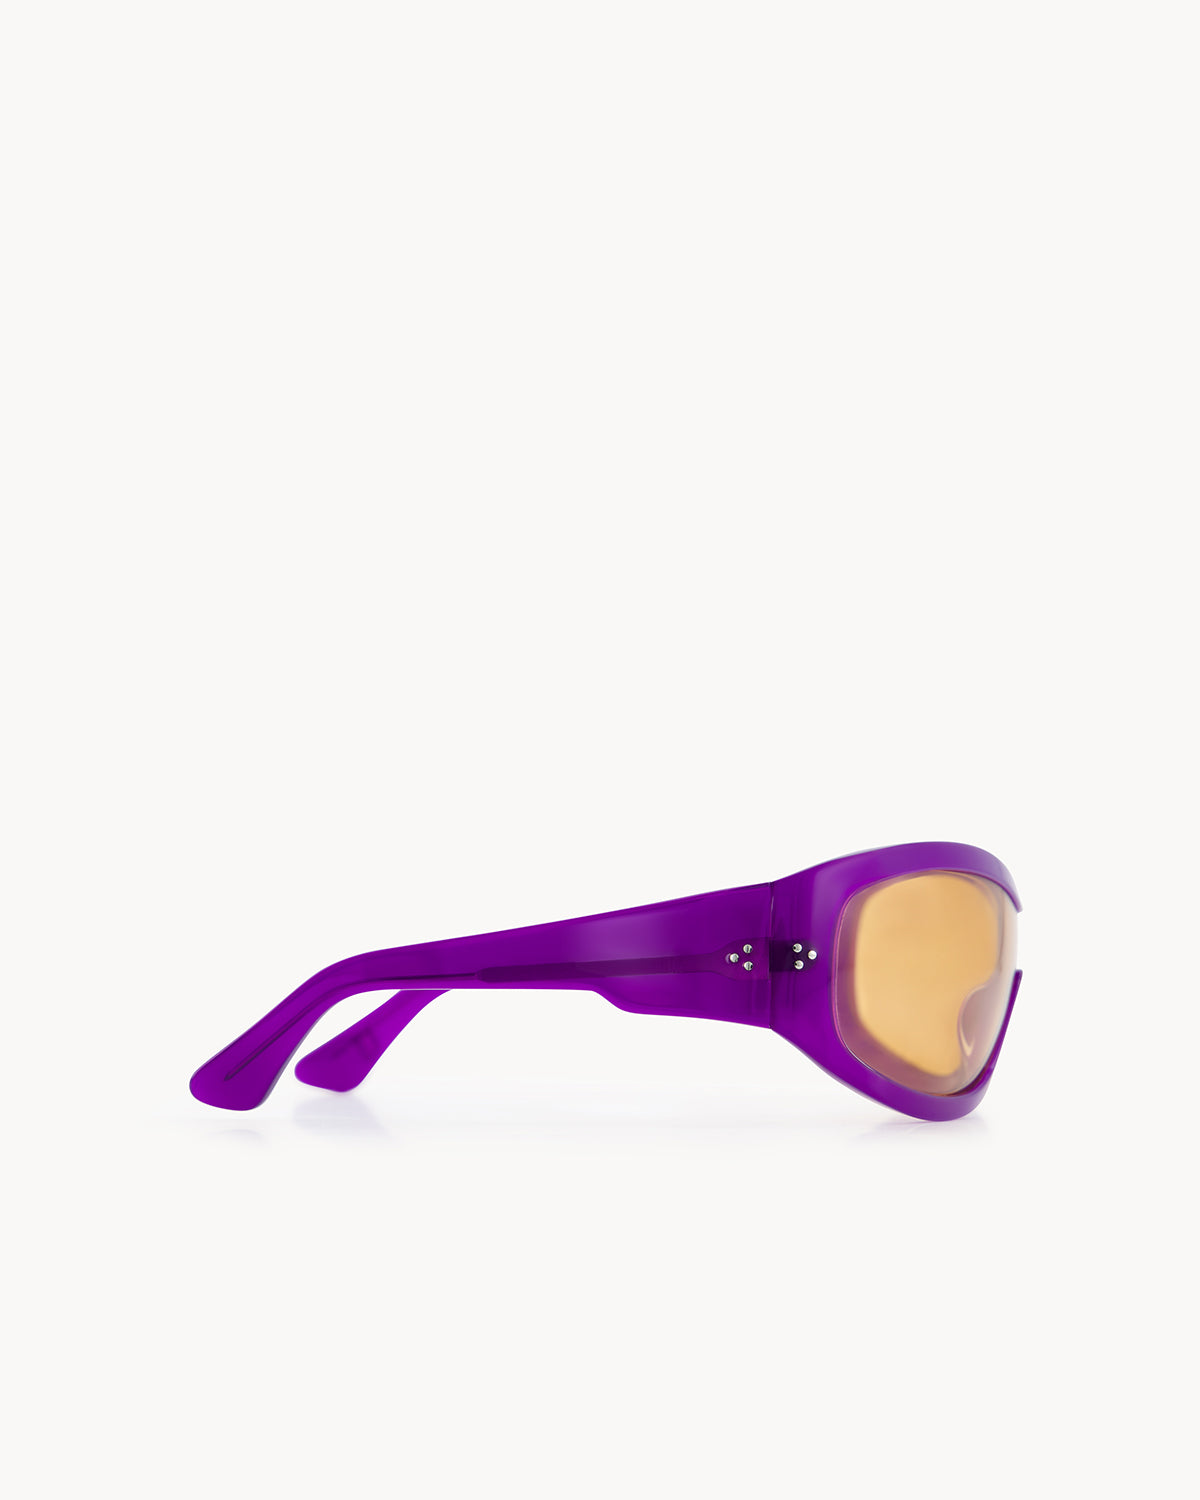 Port Tanger Nunny Sunglasses in Deep Purple Acetate and Amber Lenses 4